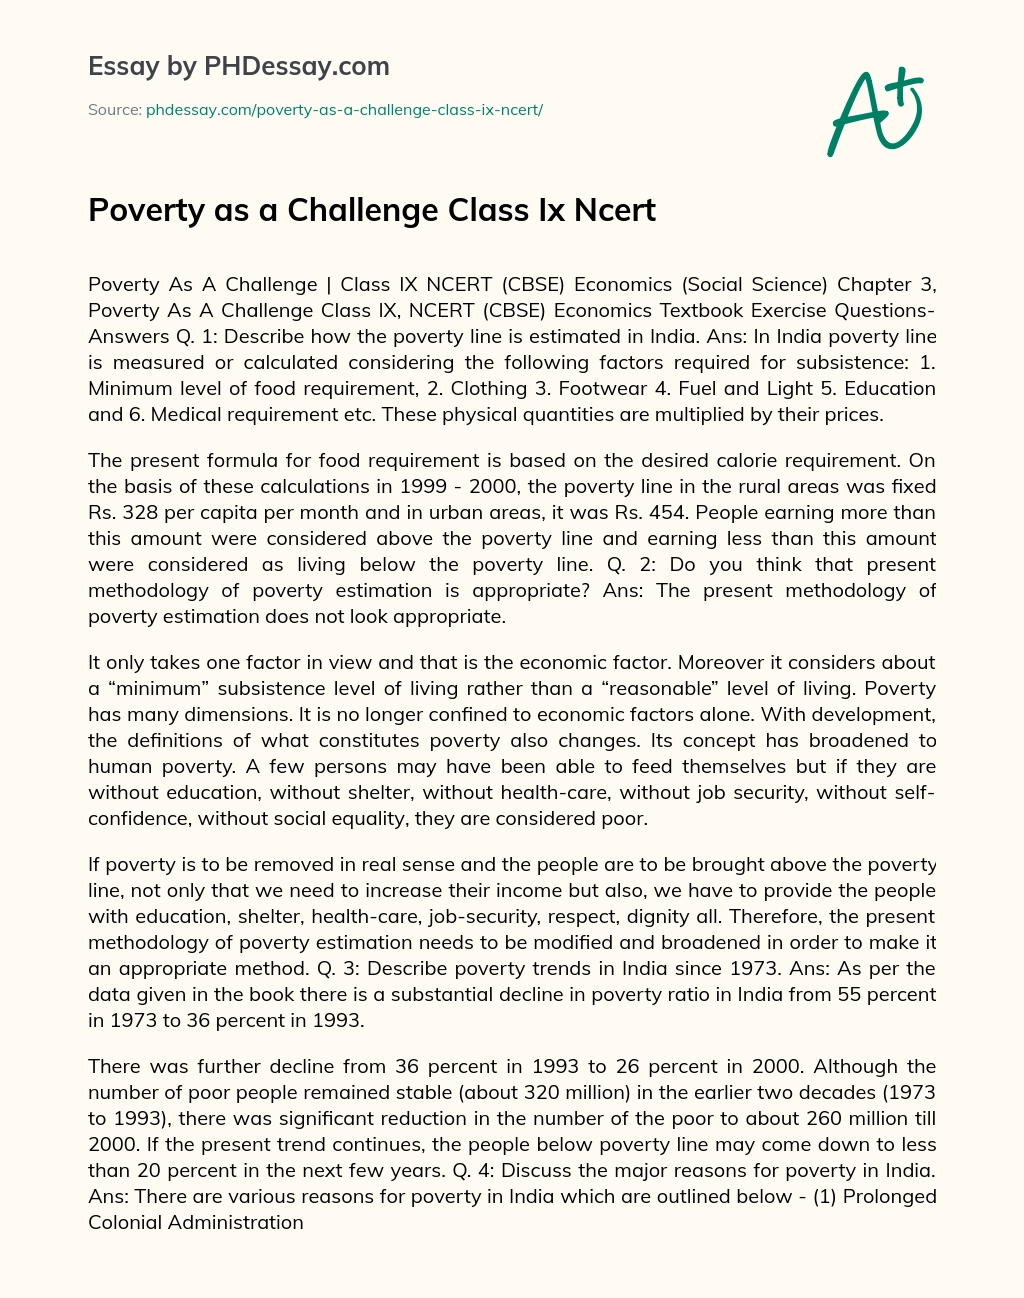 Poverty as a Challenge Class Ix Ncert essay